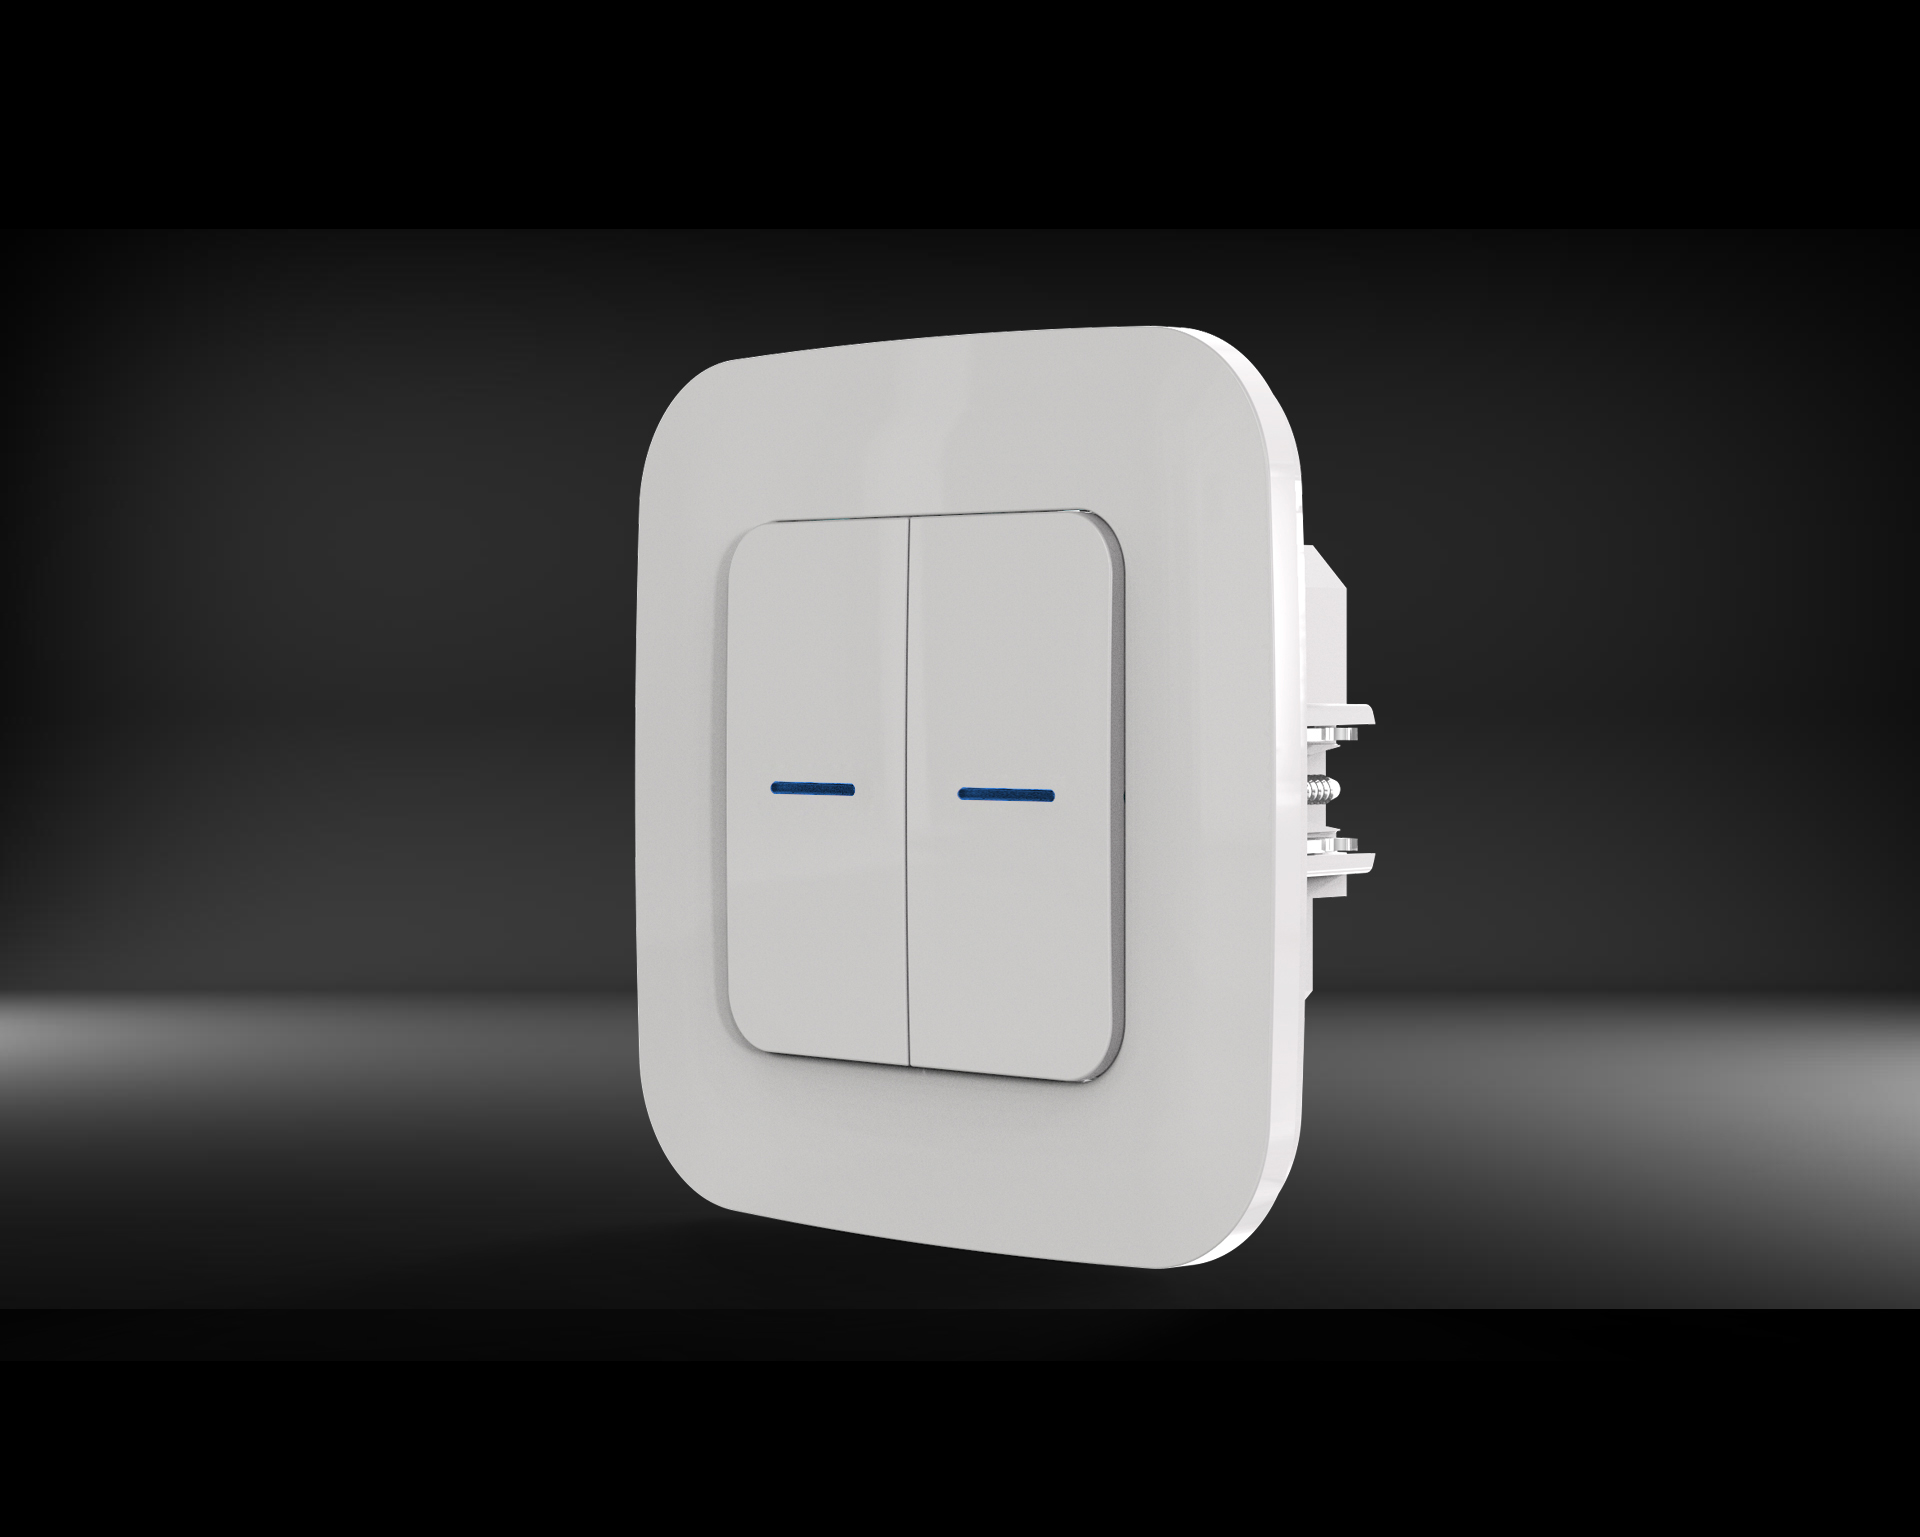 Benefits of Using a Smart Switch in Your Home